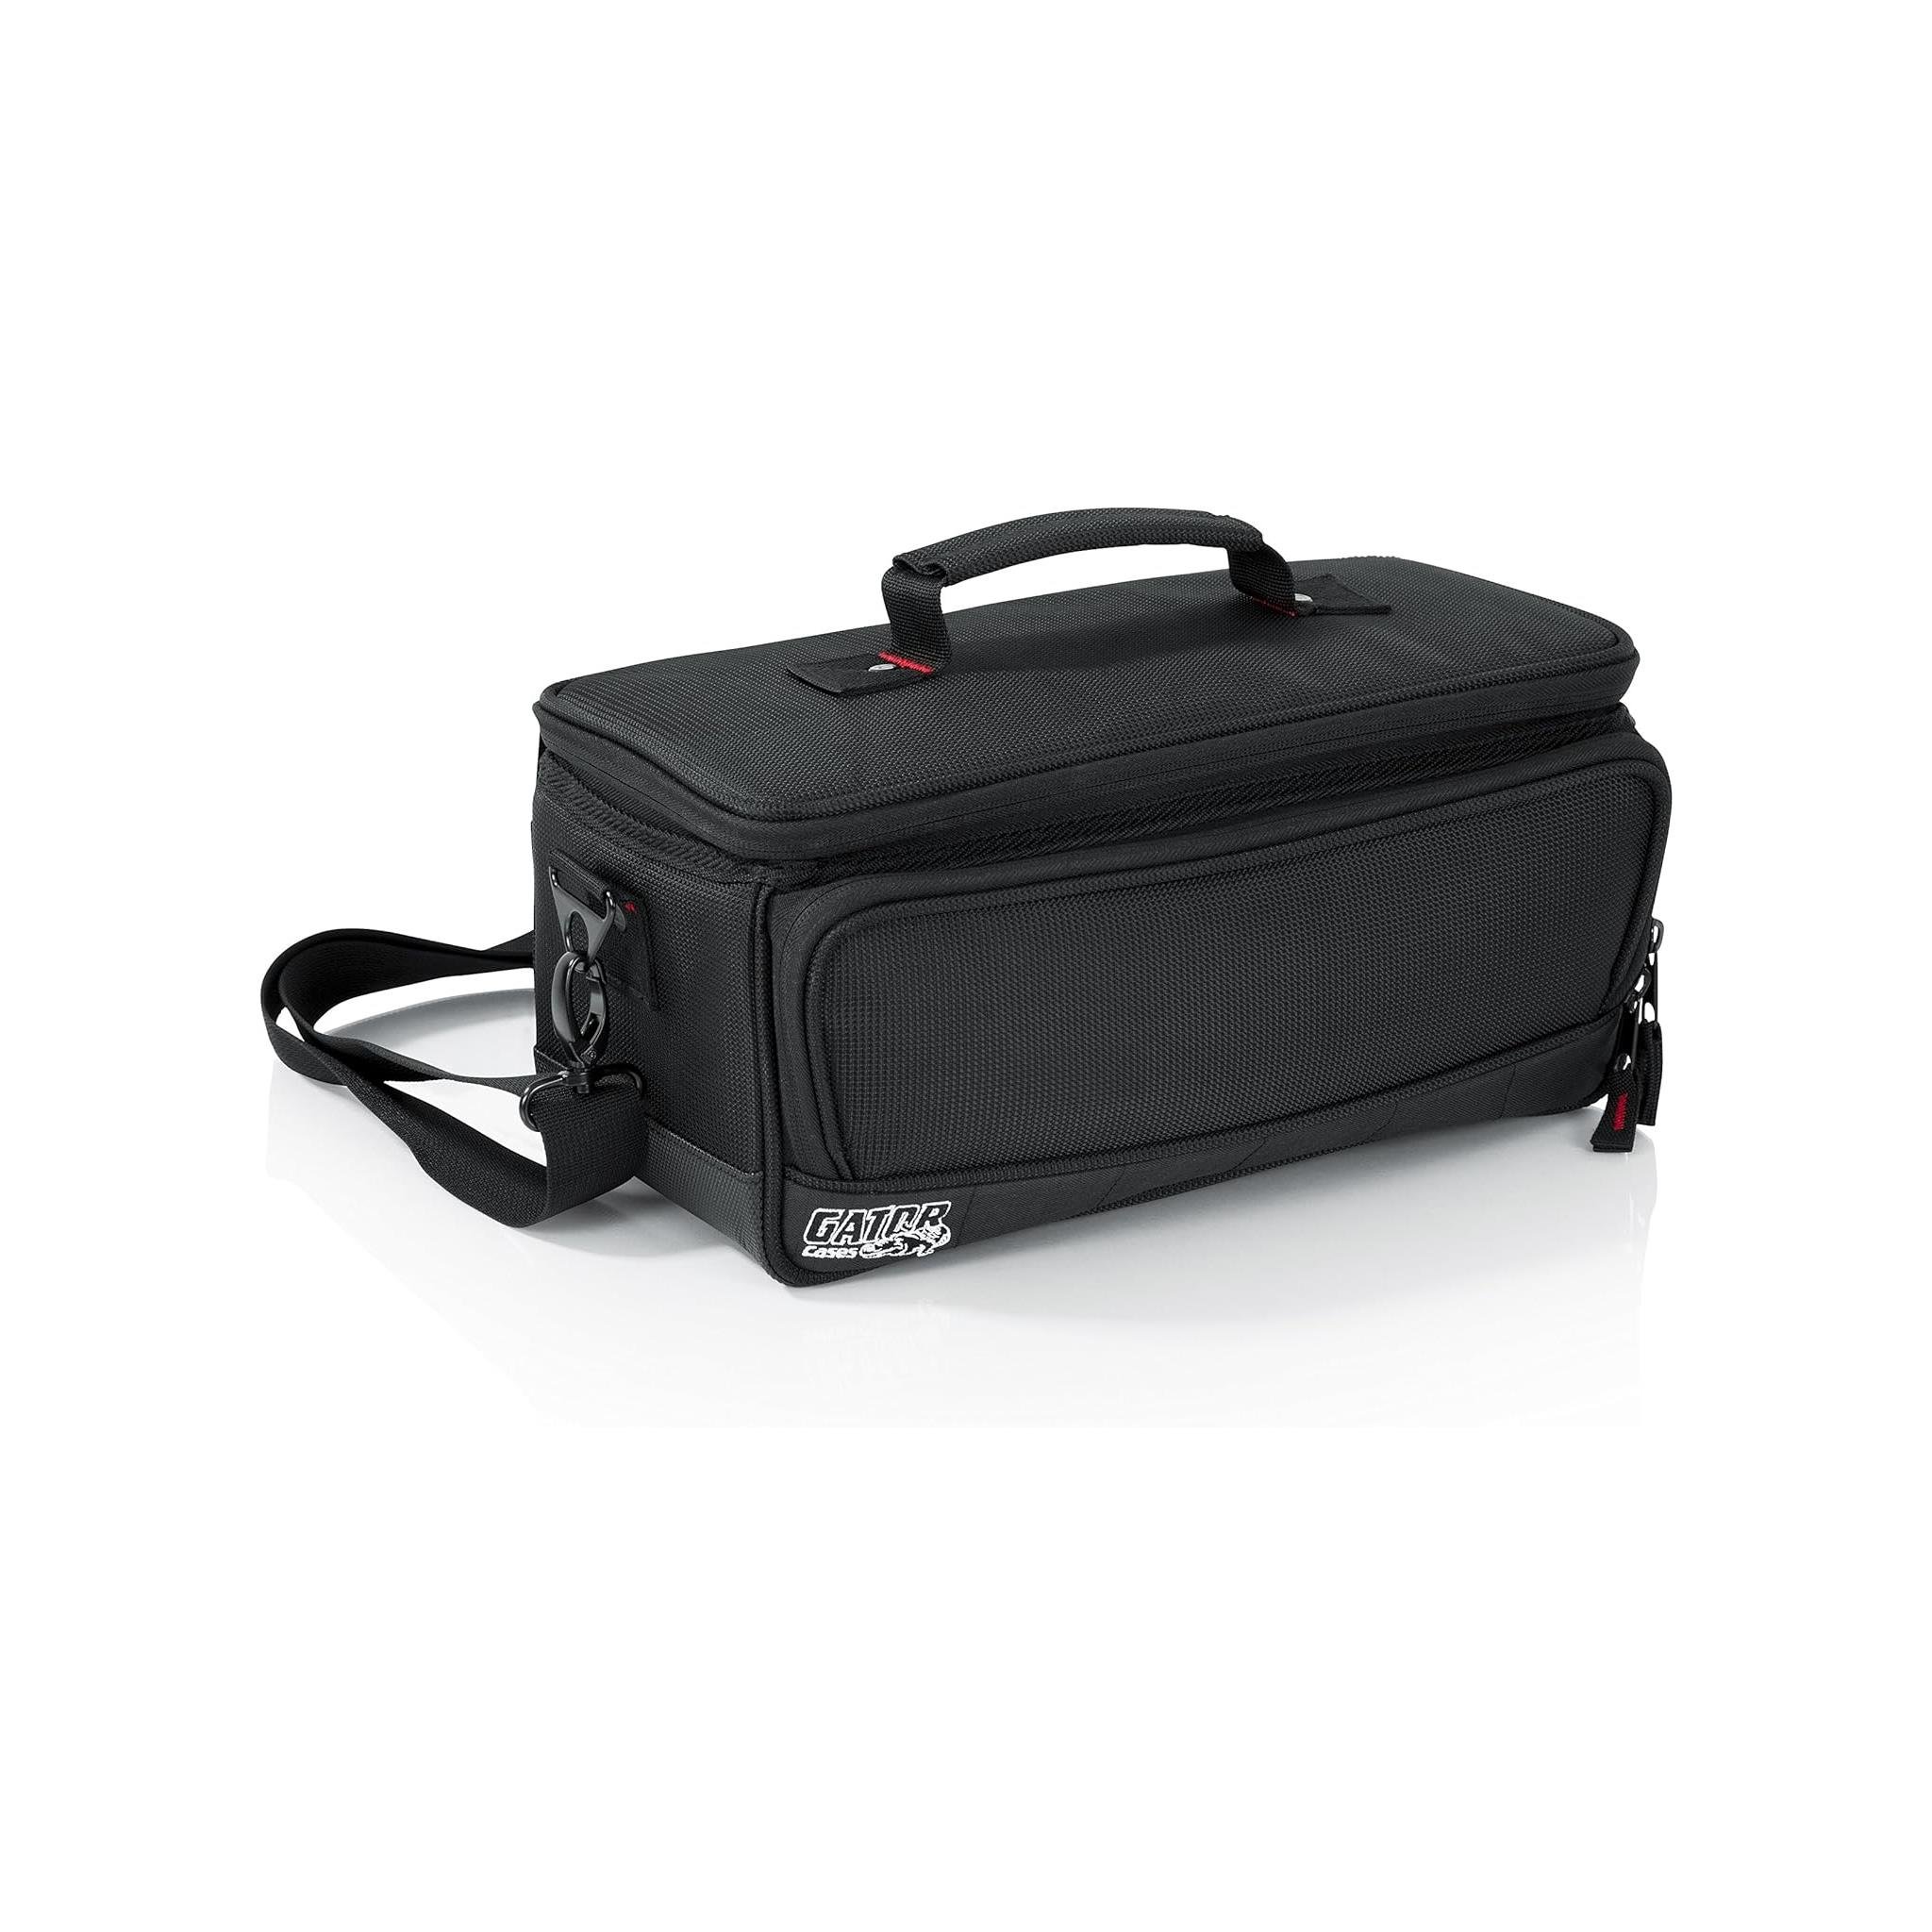 Gator Cases Padded Nylon Bag Custom Fit for the Behringer X-AIR series Mixers; 13.1" X 6.25" X 6"